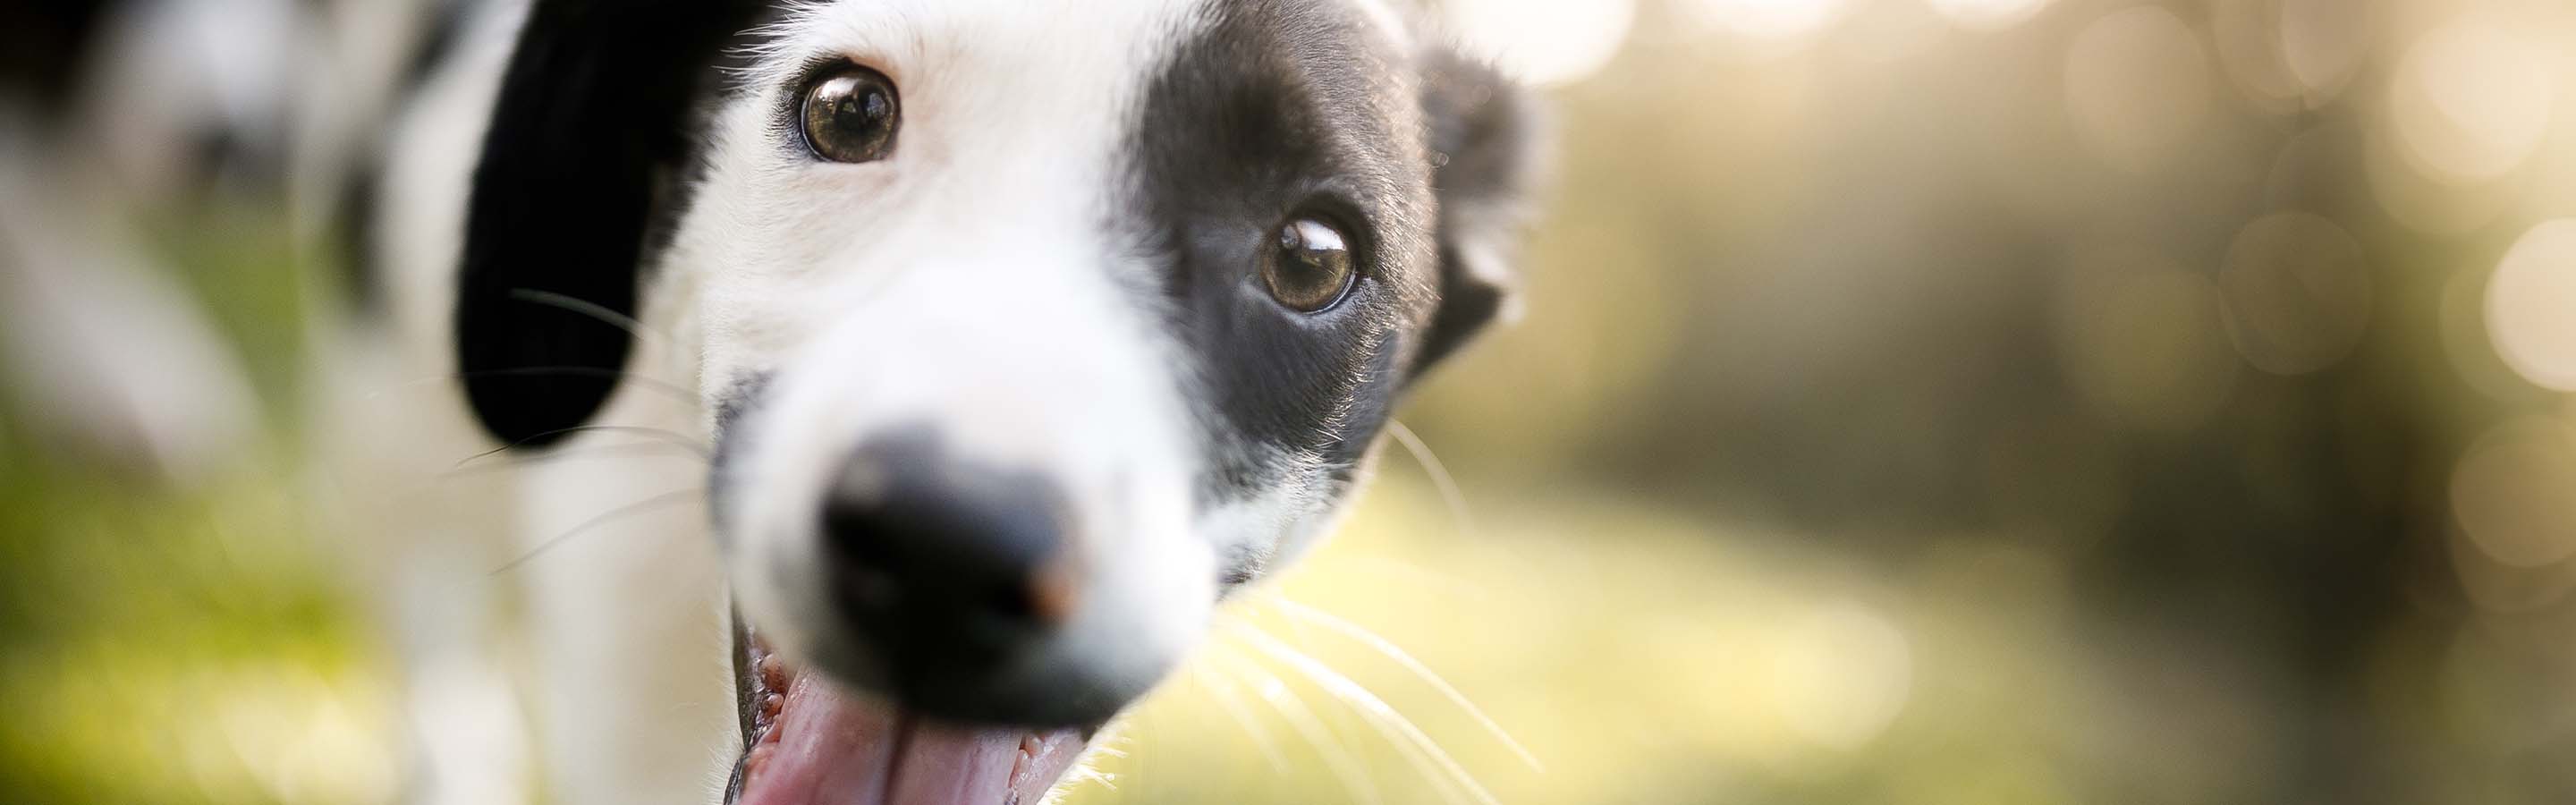 White and black dog with tongue sticking out